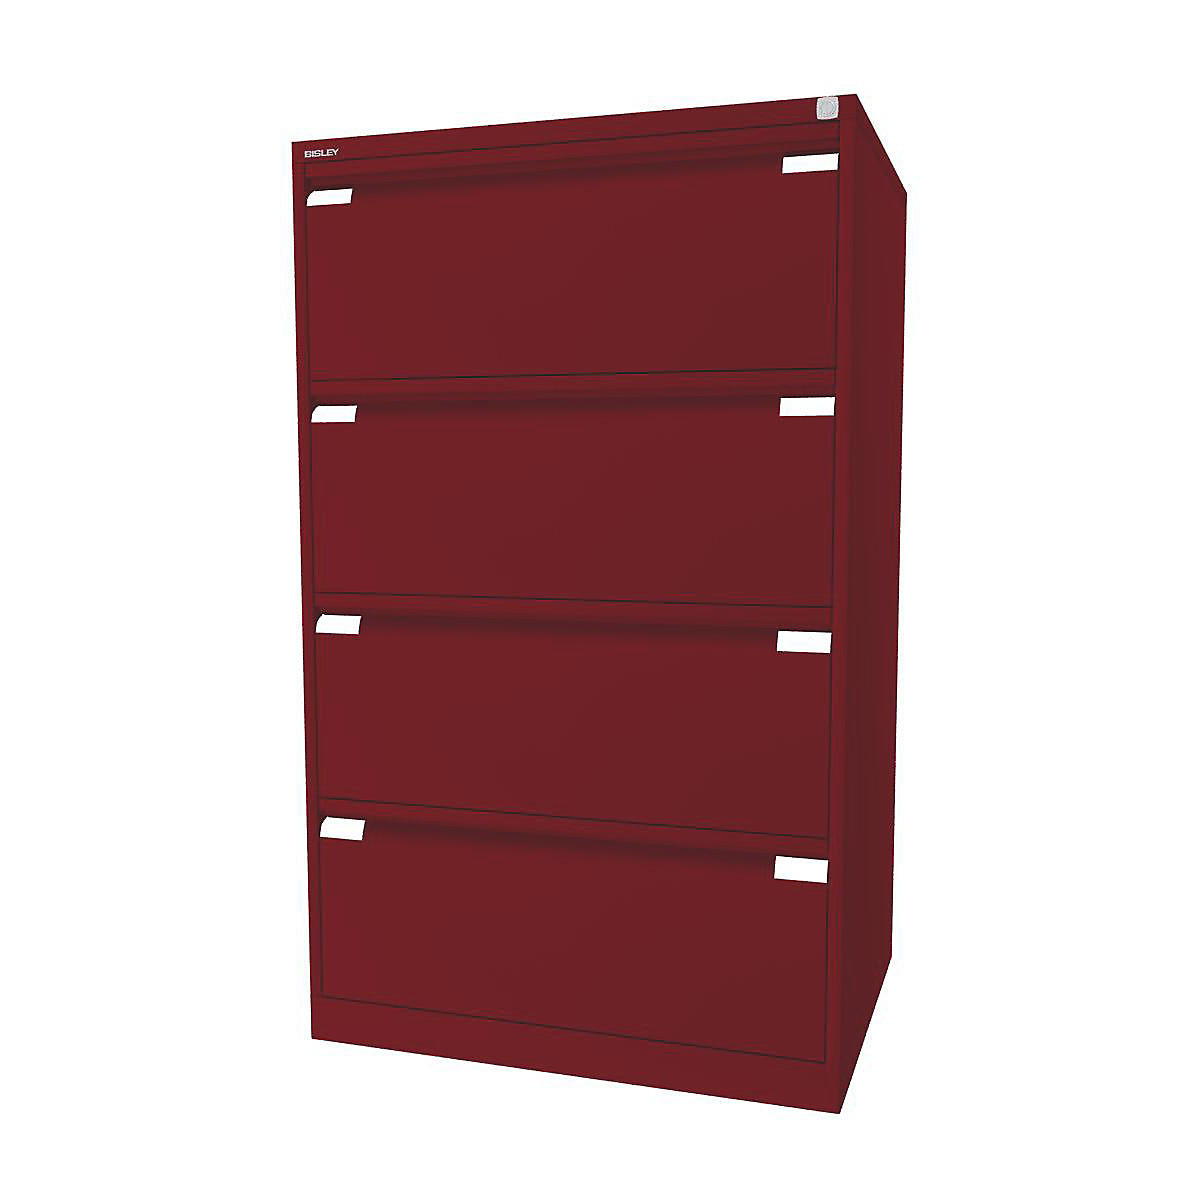 Suspension file cabinet, 2-track – BISLEY, 4 A4 drawers, cardinal red-5